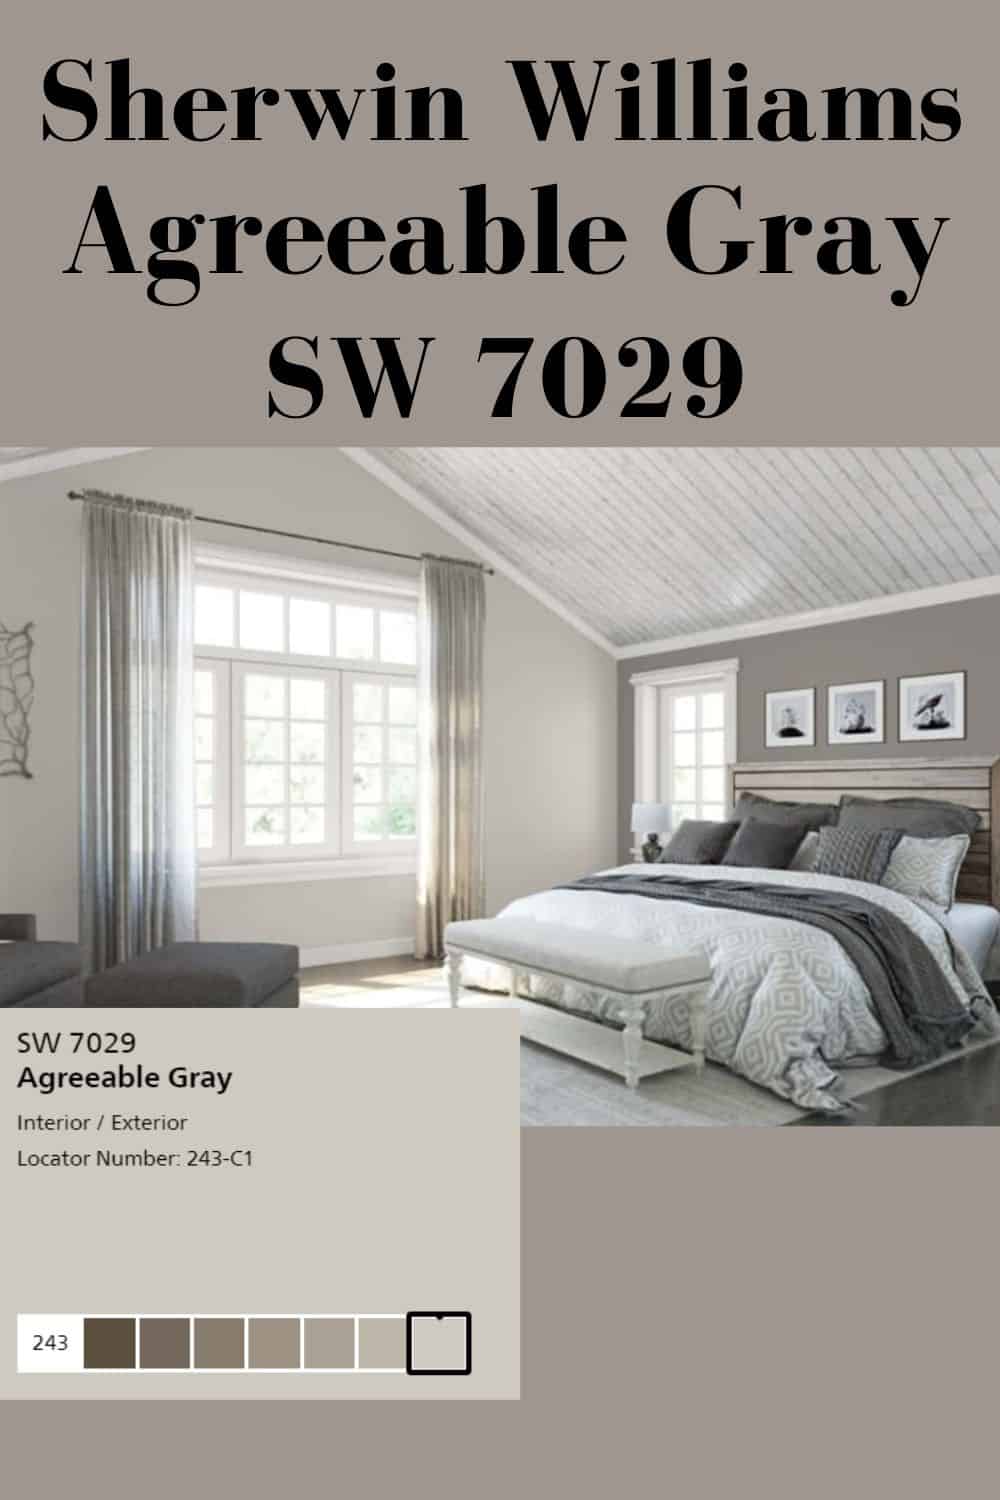 Agreeable Gray SW 7029 Is it Truly the Best Gray? West Magnolia Charm